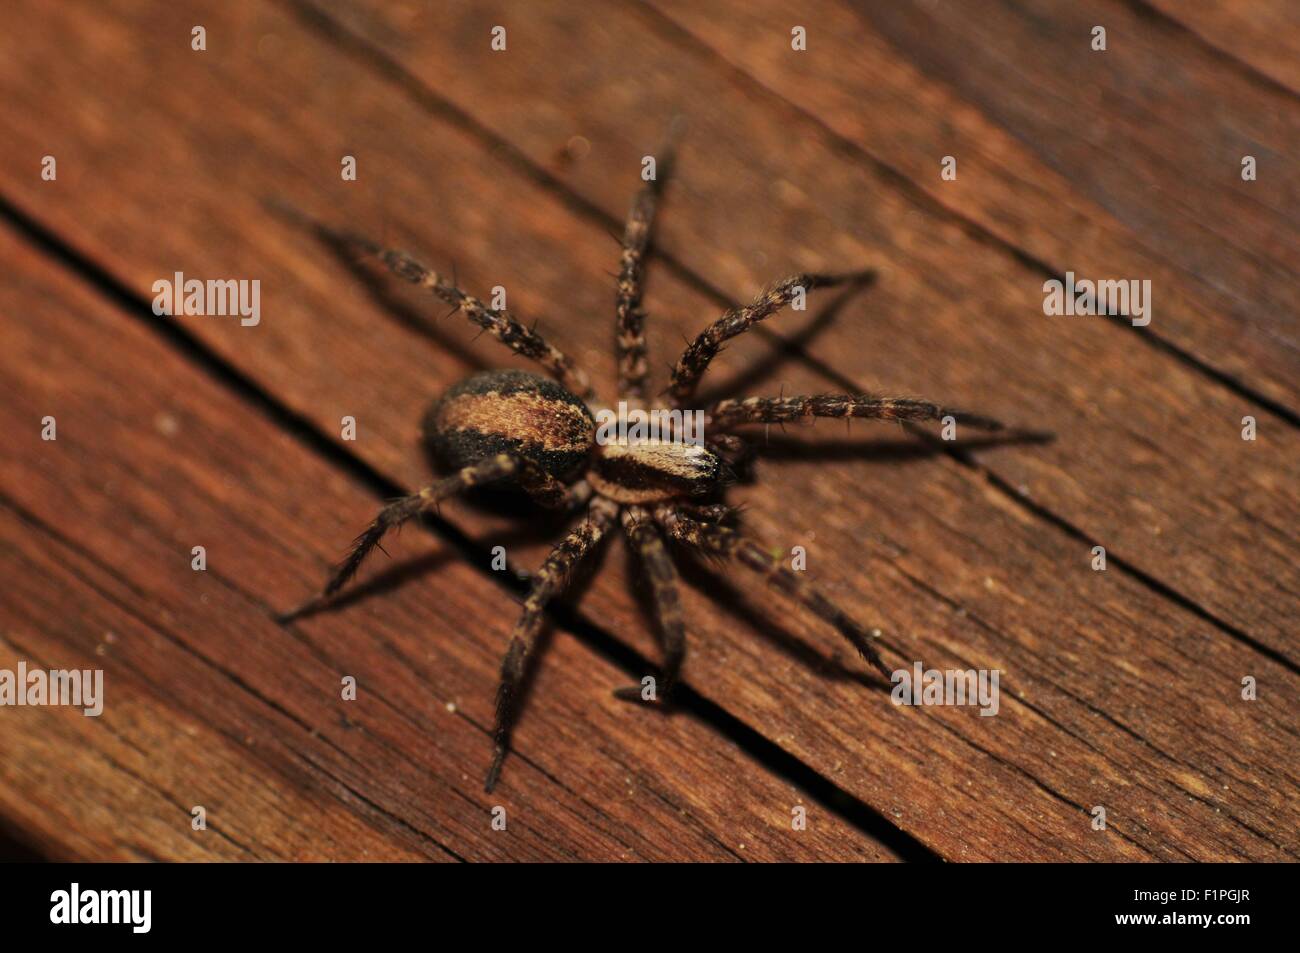 Home Spider on the Wood Deck Board Stock Photo - Alamy